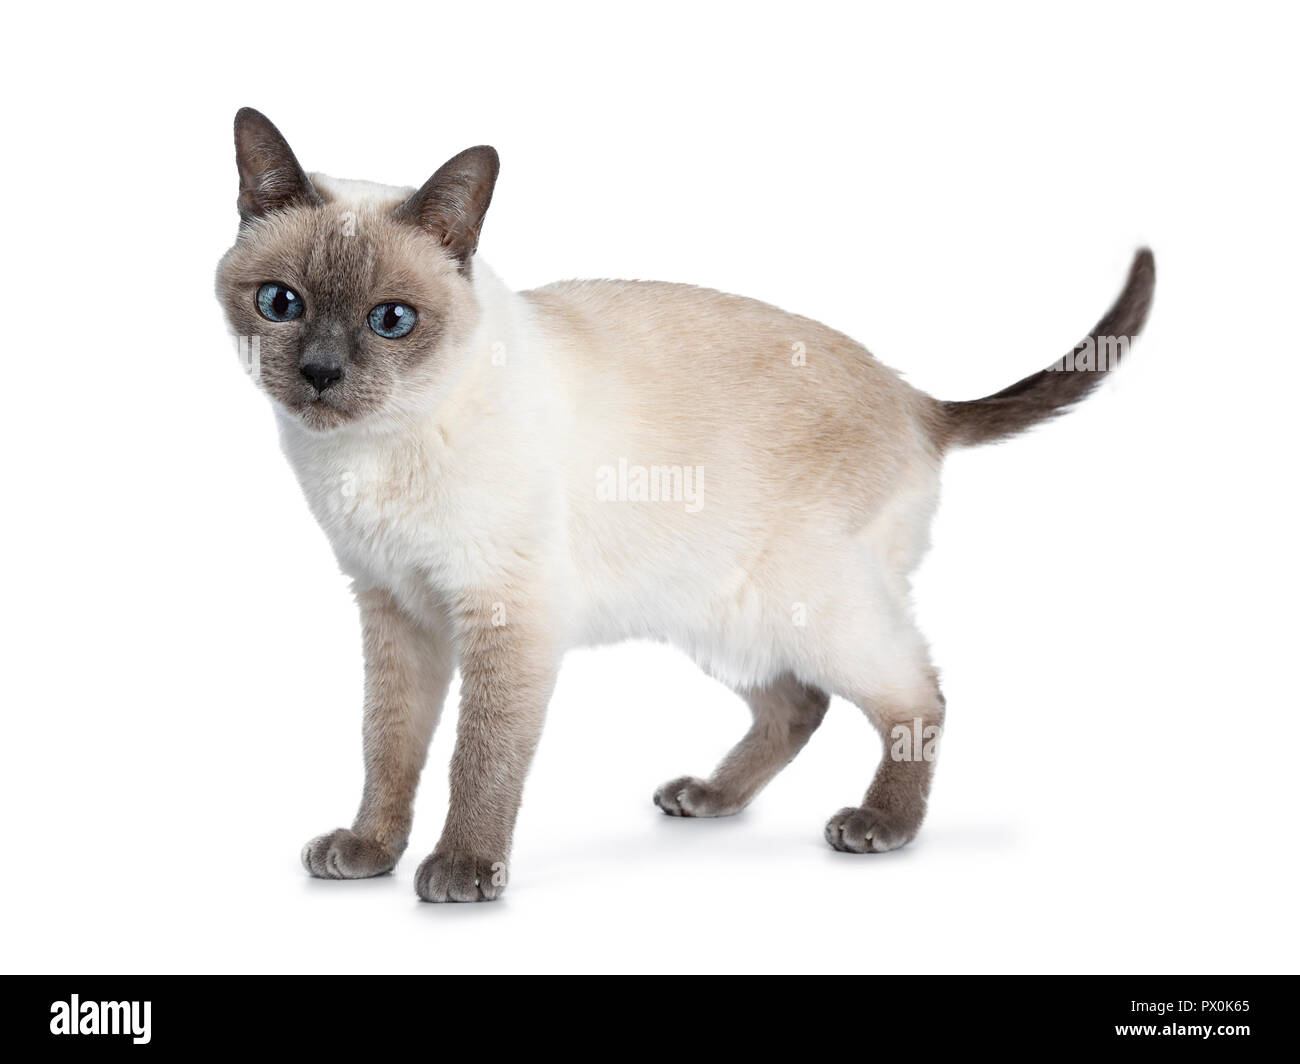 Senior blue point Thai cat standing side ways, looking down with blue wise eyes. Isolated on white background. Tail fierce in air. Stock Photo